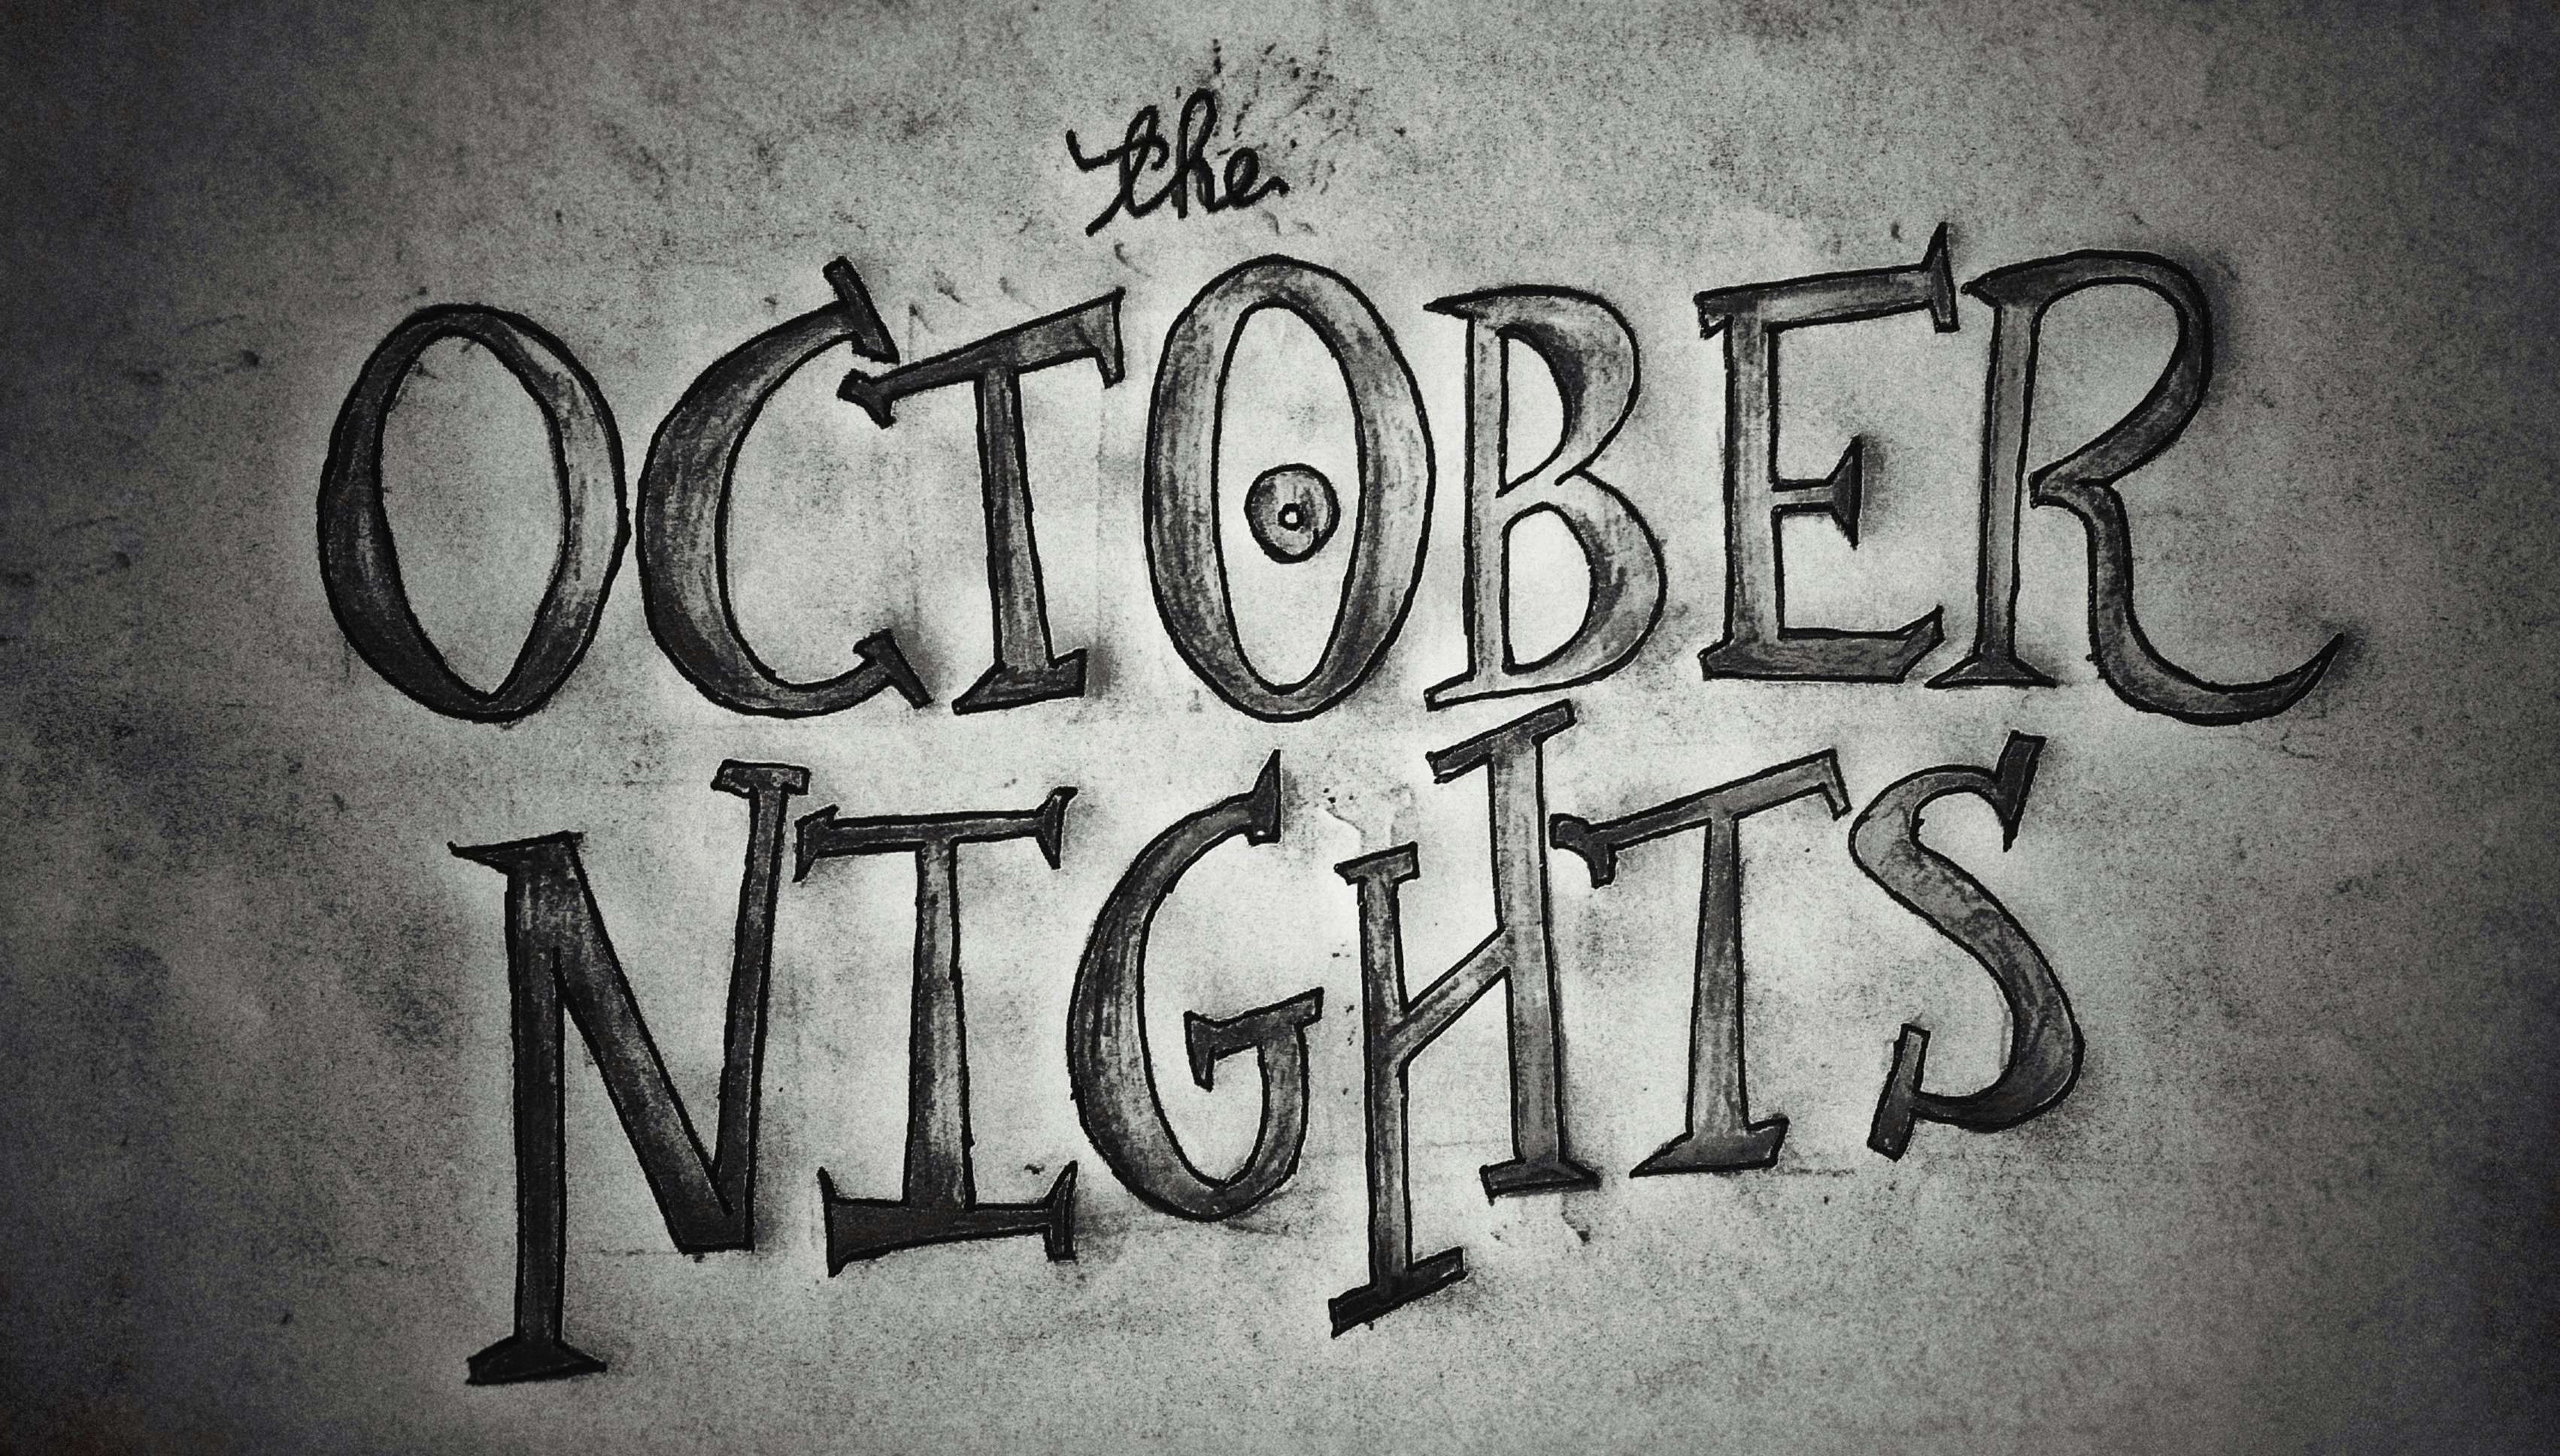 The October Nights